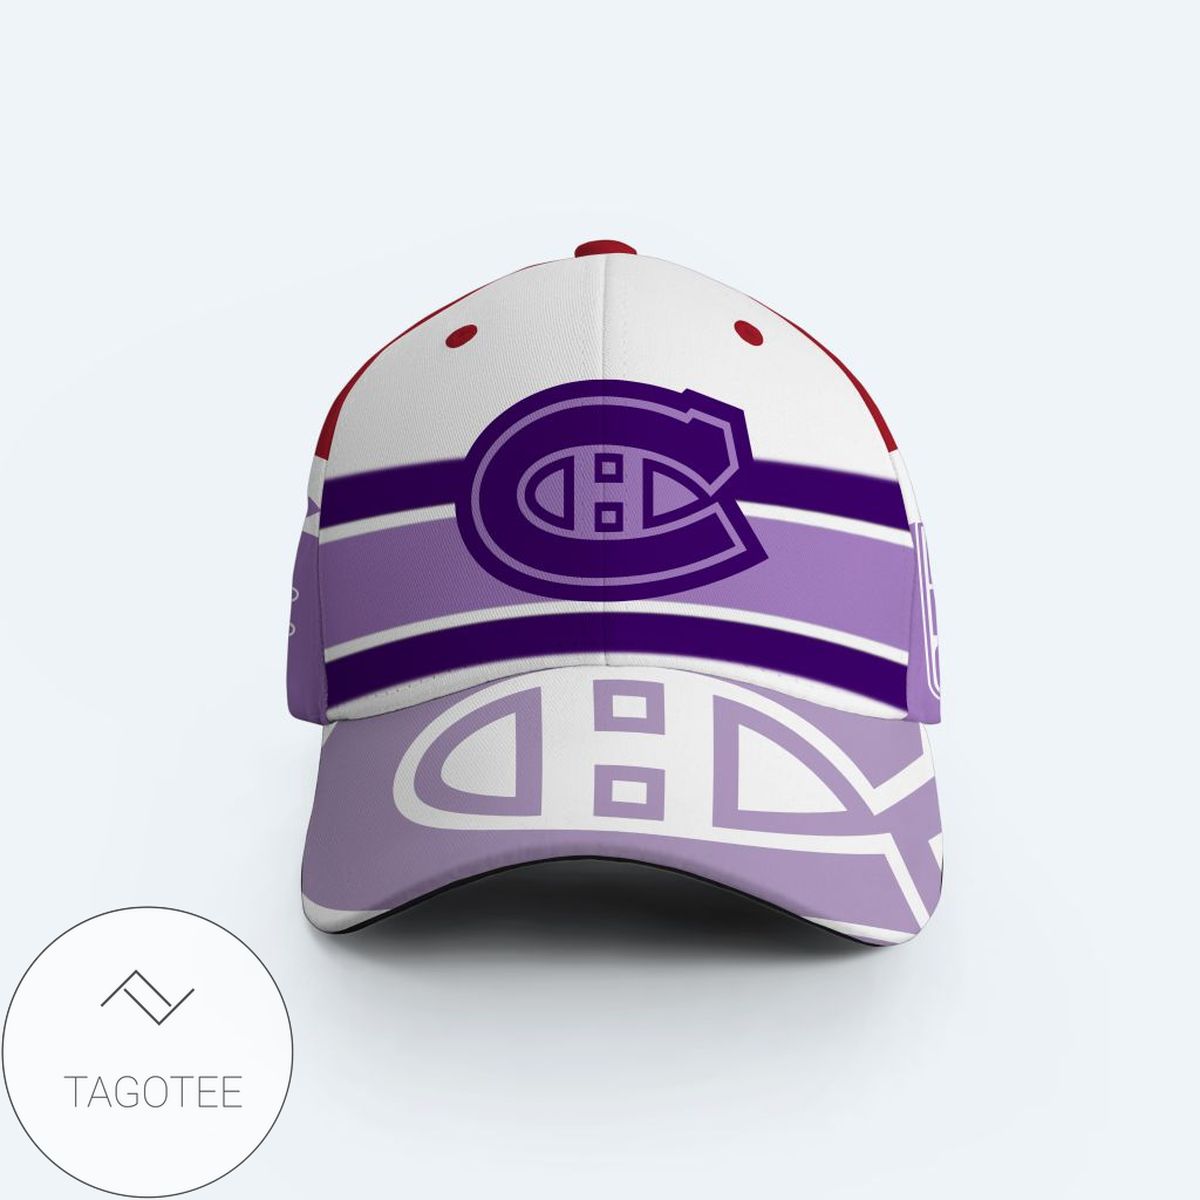 NHL Montreal Canadiens Fights Cancer Cap